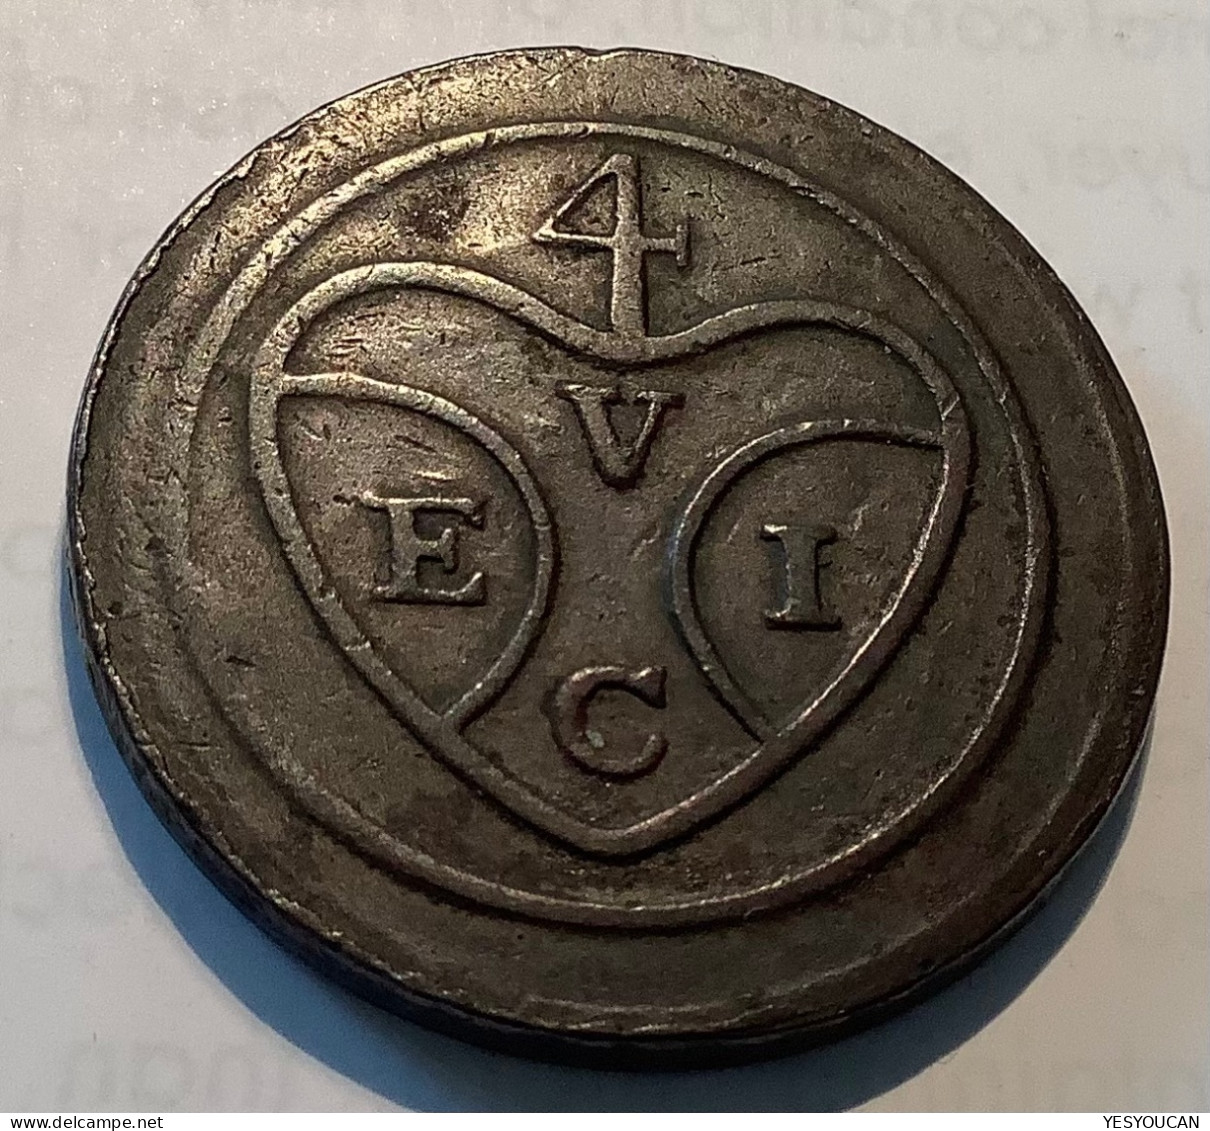 East India Company 19th C. Scarce Bronze Weight Or Token "4 / V E I C", Very Fine (Inde, Coin Monnaie - India